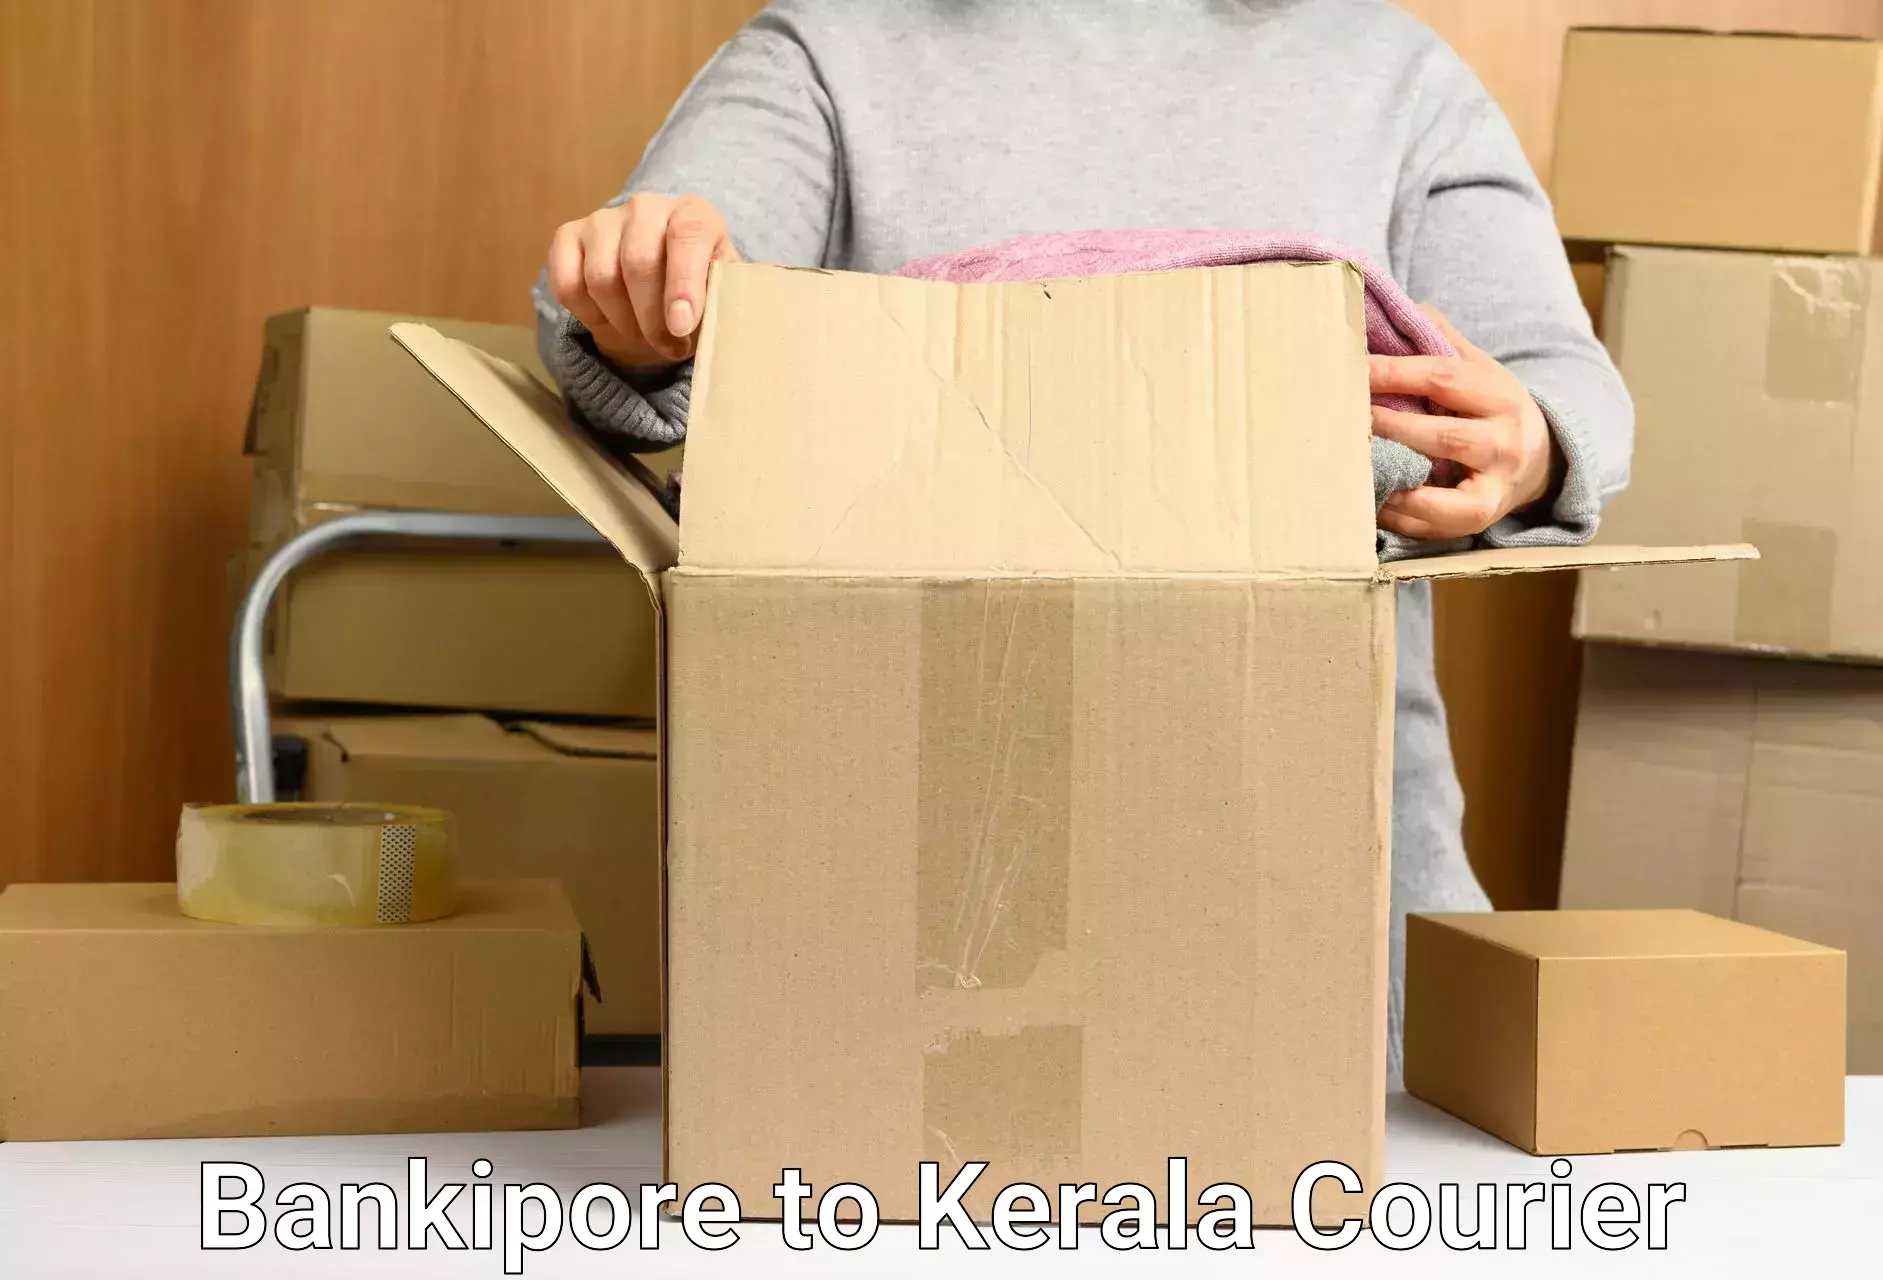 Small parcel delivery in Bankipore to Munnar